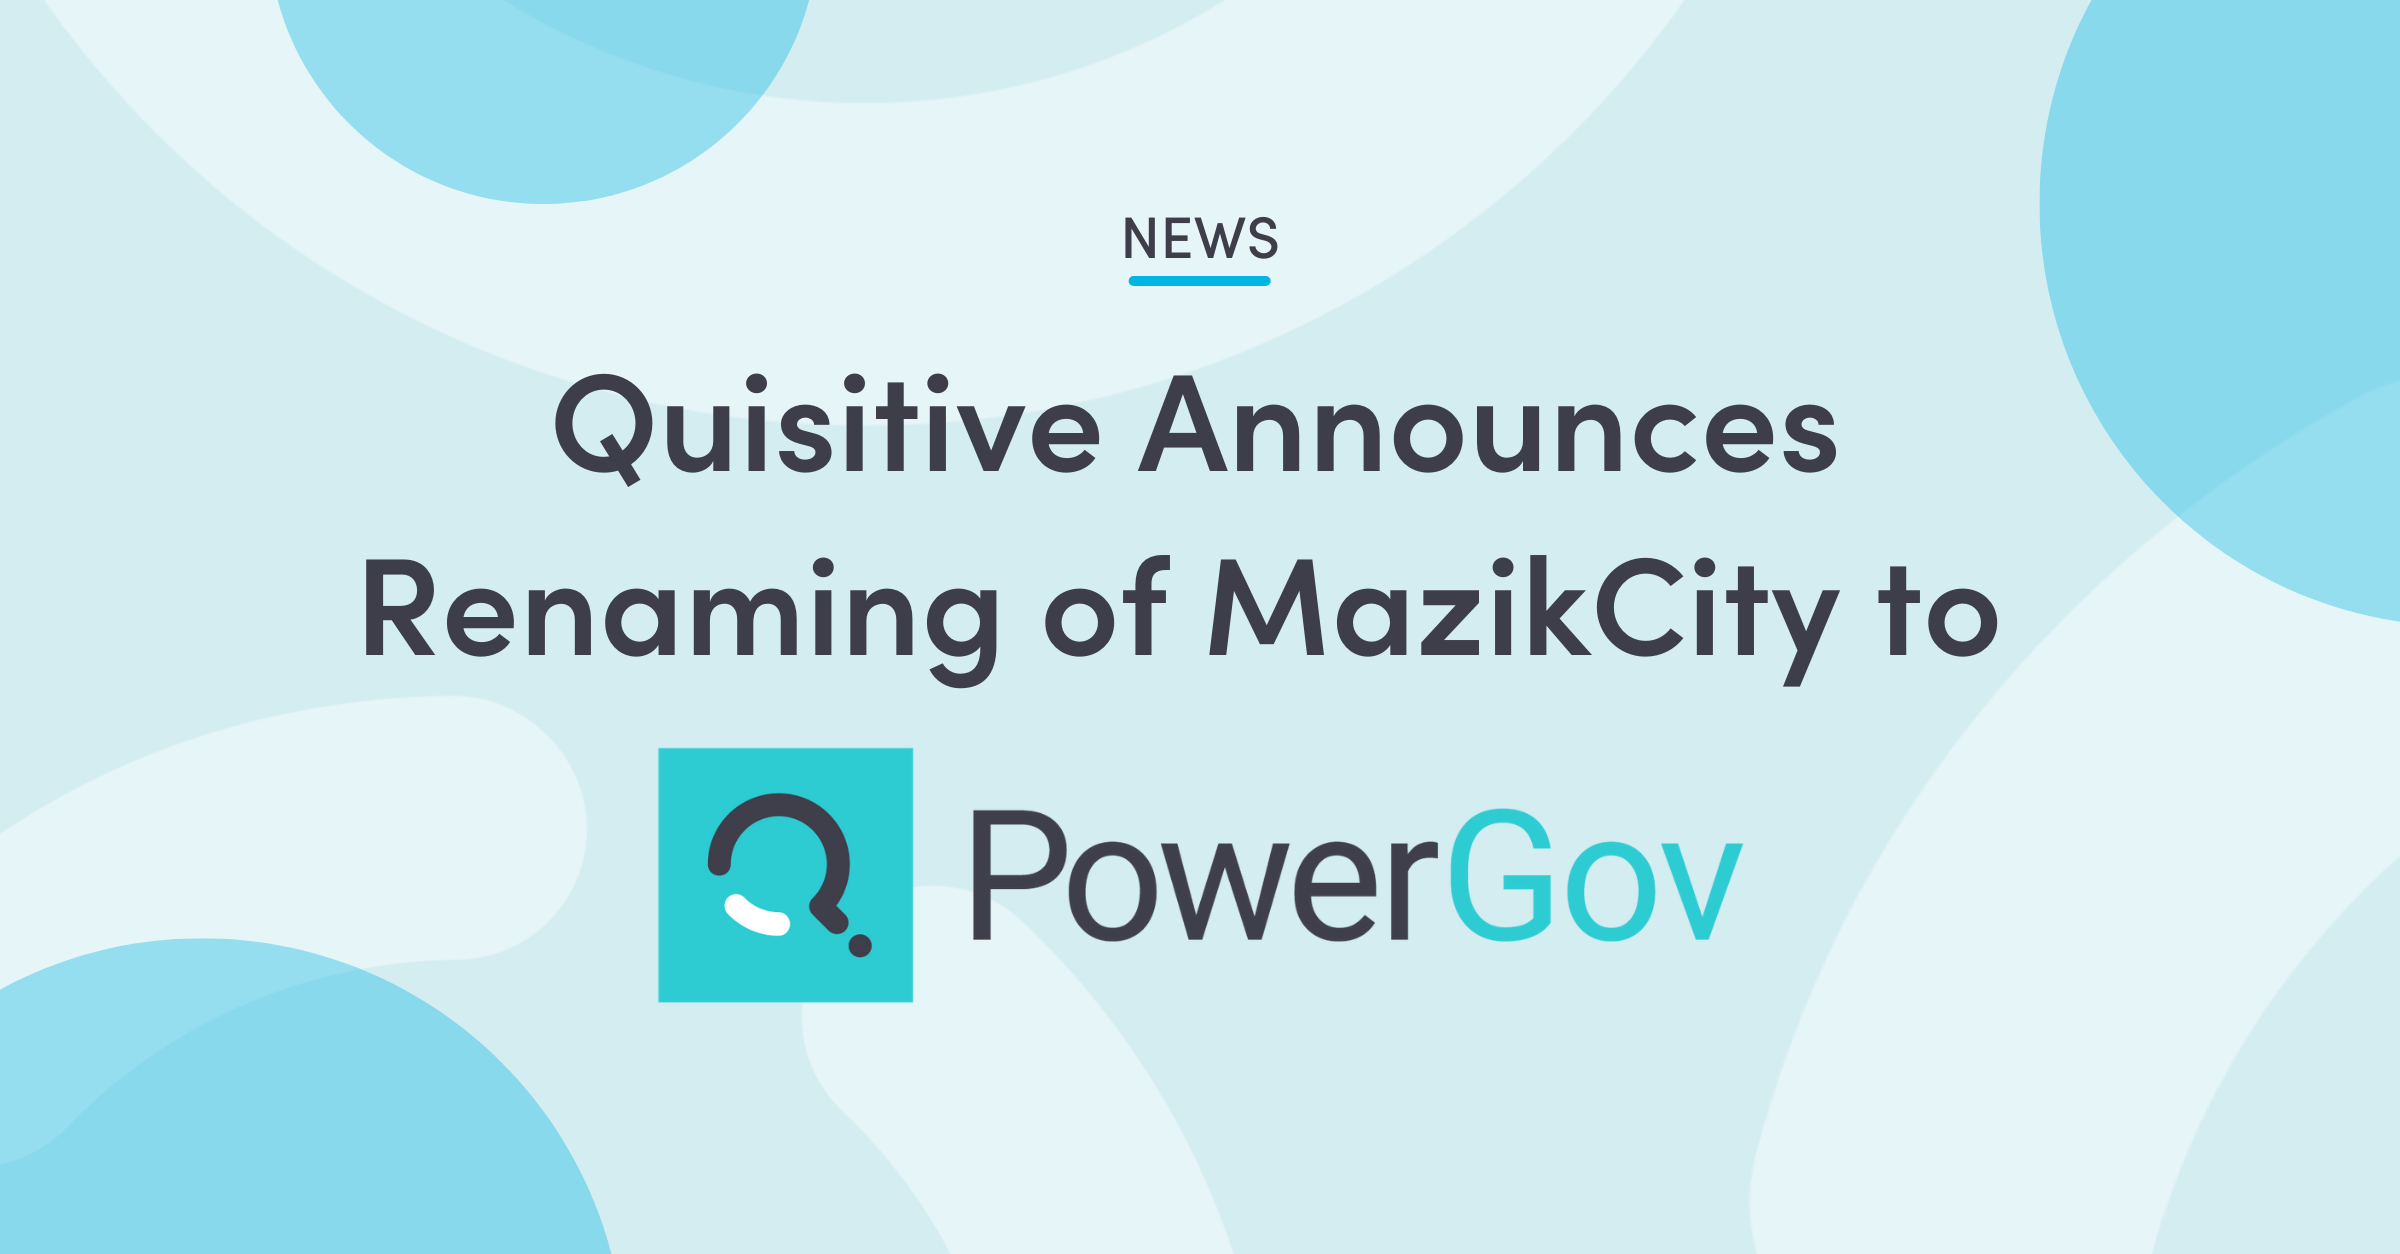 News: Quisitive Announces Renaming of MazikCity to PowerGov Feature Image